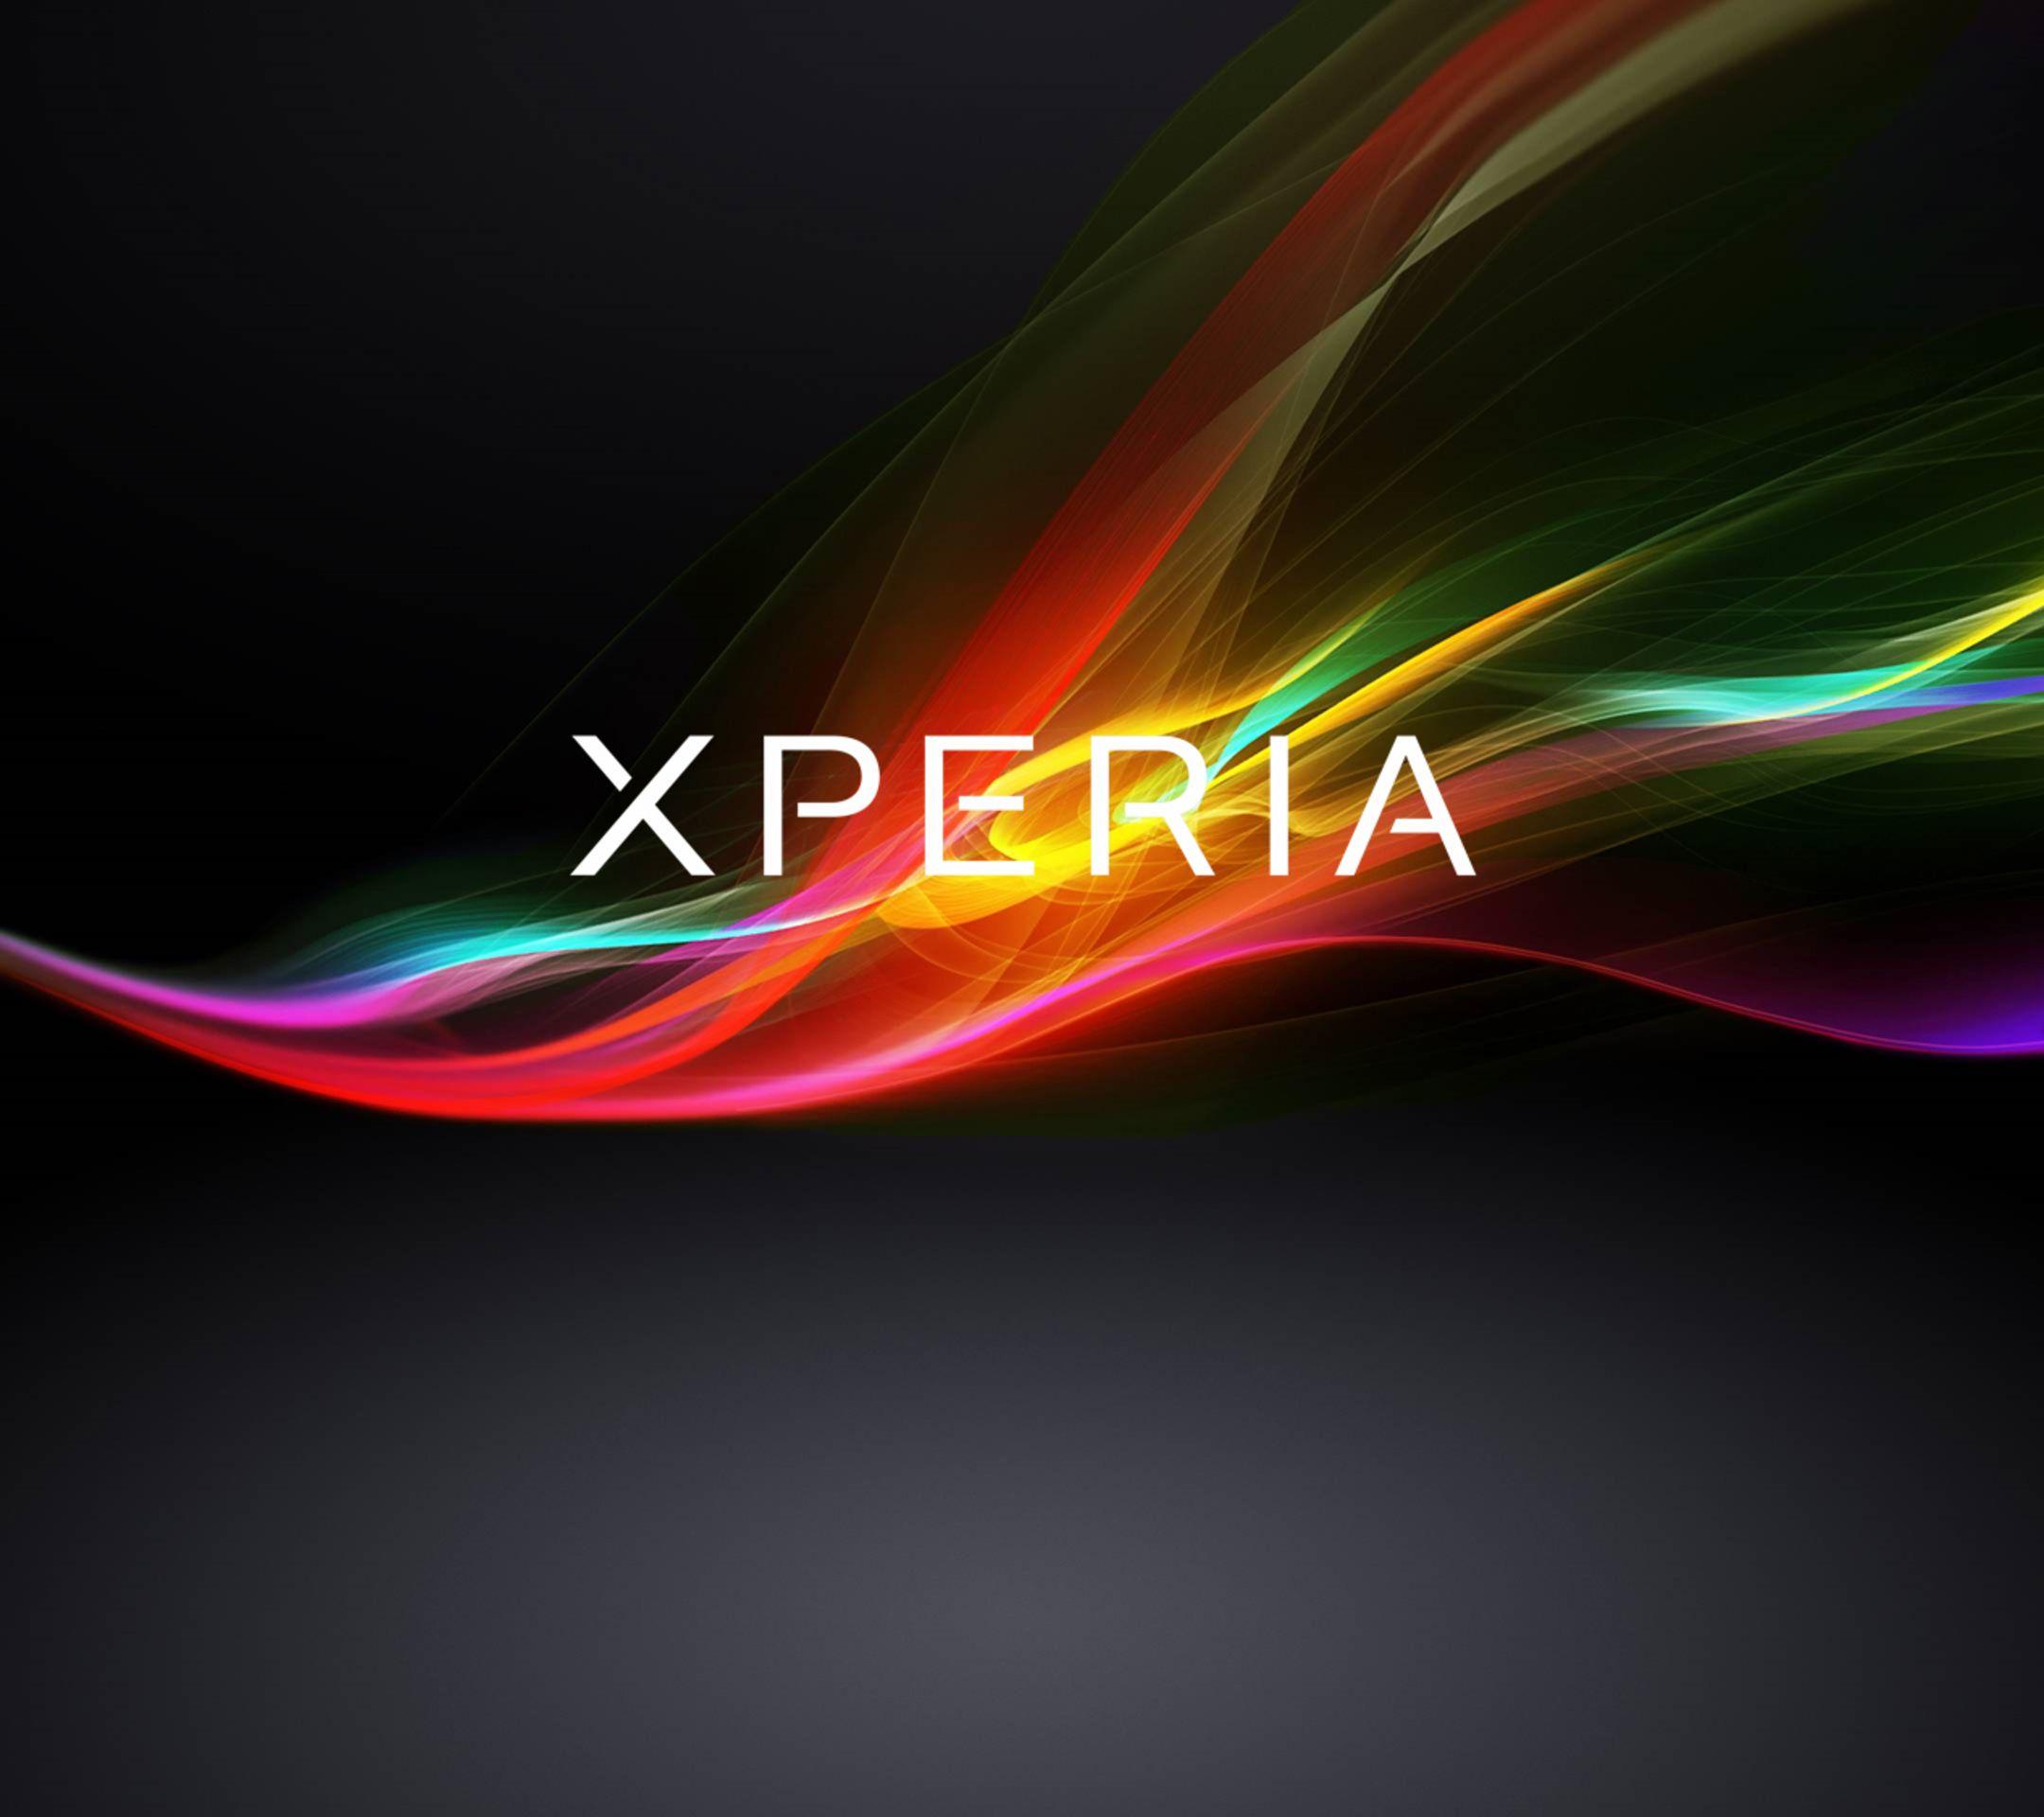 Sony Xperia Logo Wallpapers - Top Free Sony Xperia Logo Backgrounds